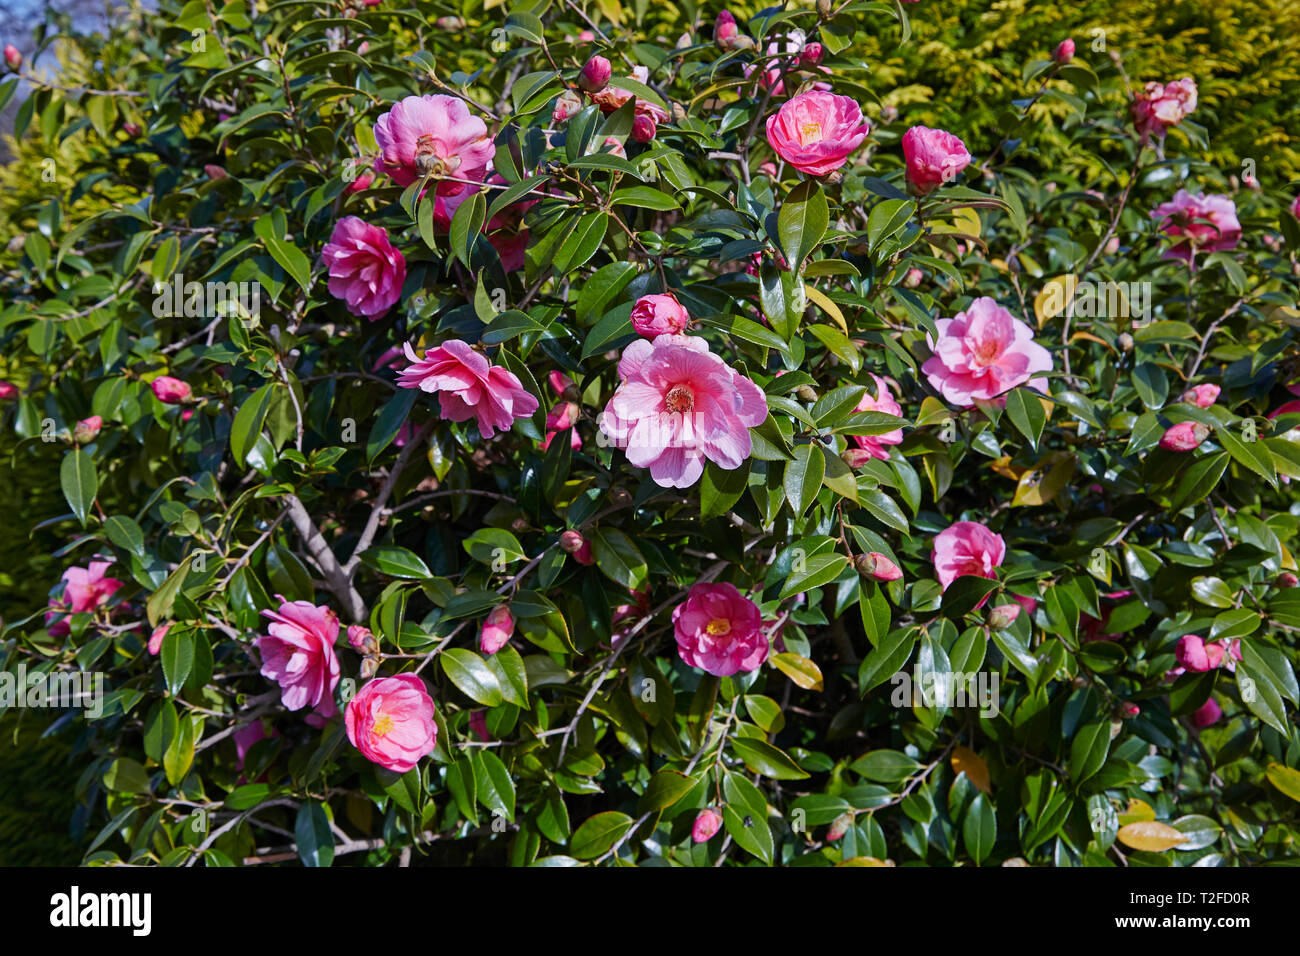 A Camelia bush in full flower in the spring. Stock Photo